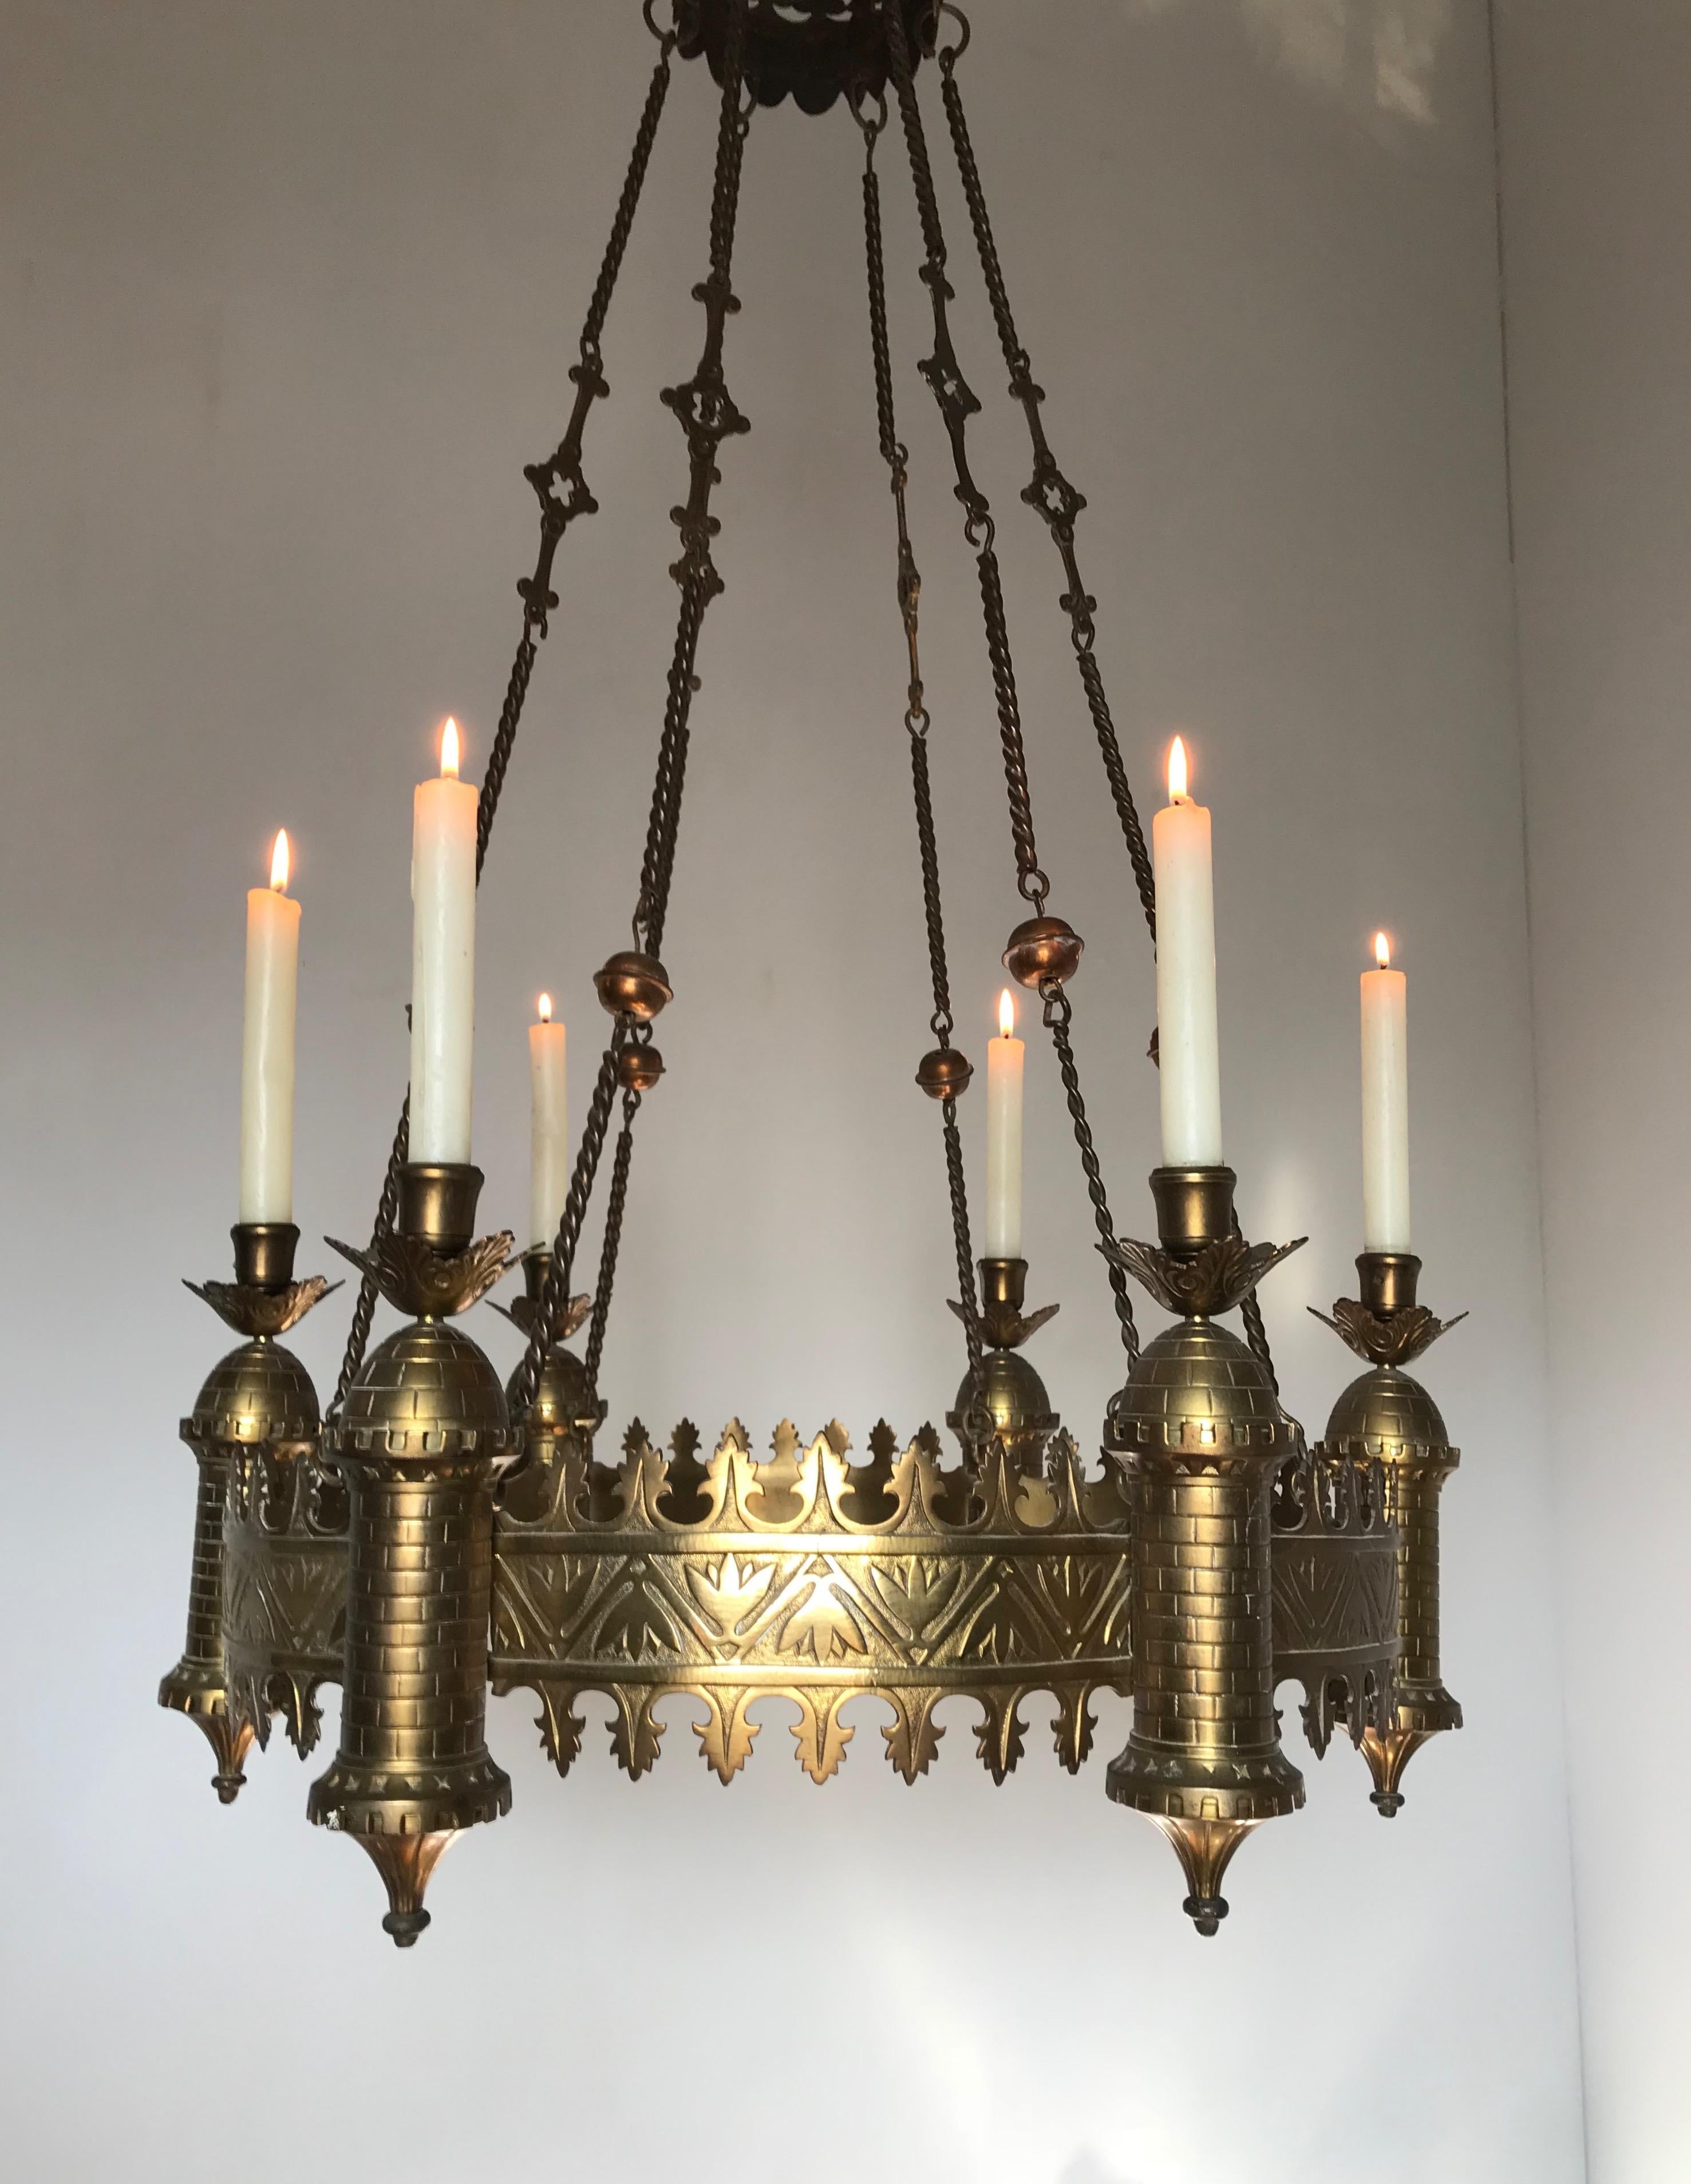 Antique Bronze and Brass Castle Tower Design Gothic Revival Candle Chandelier 10